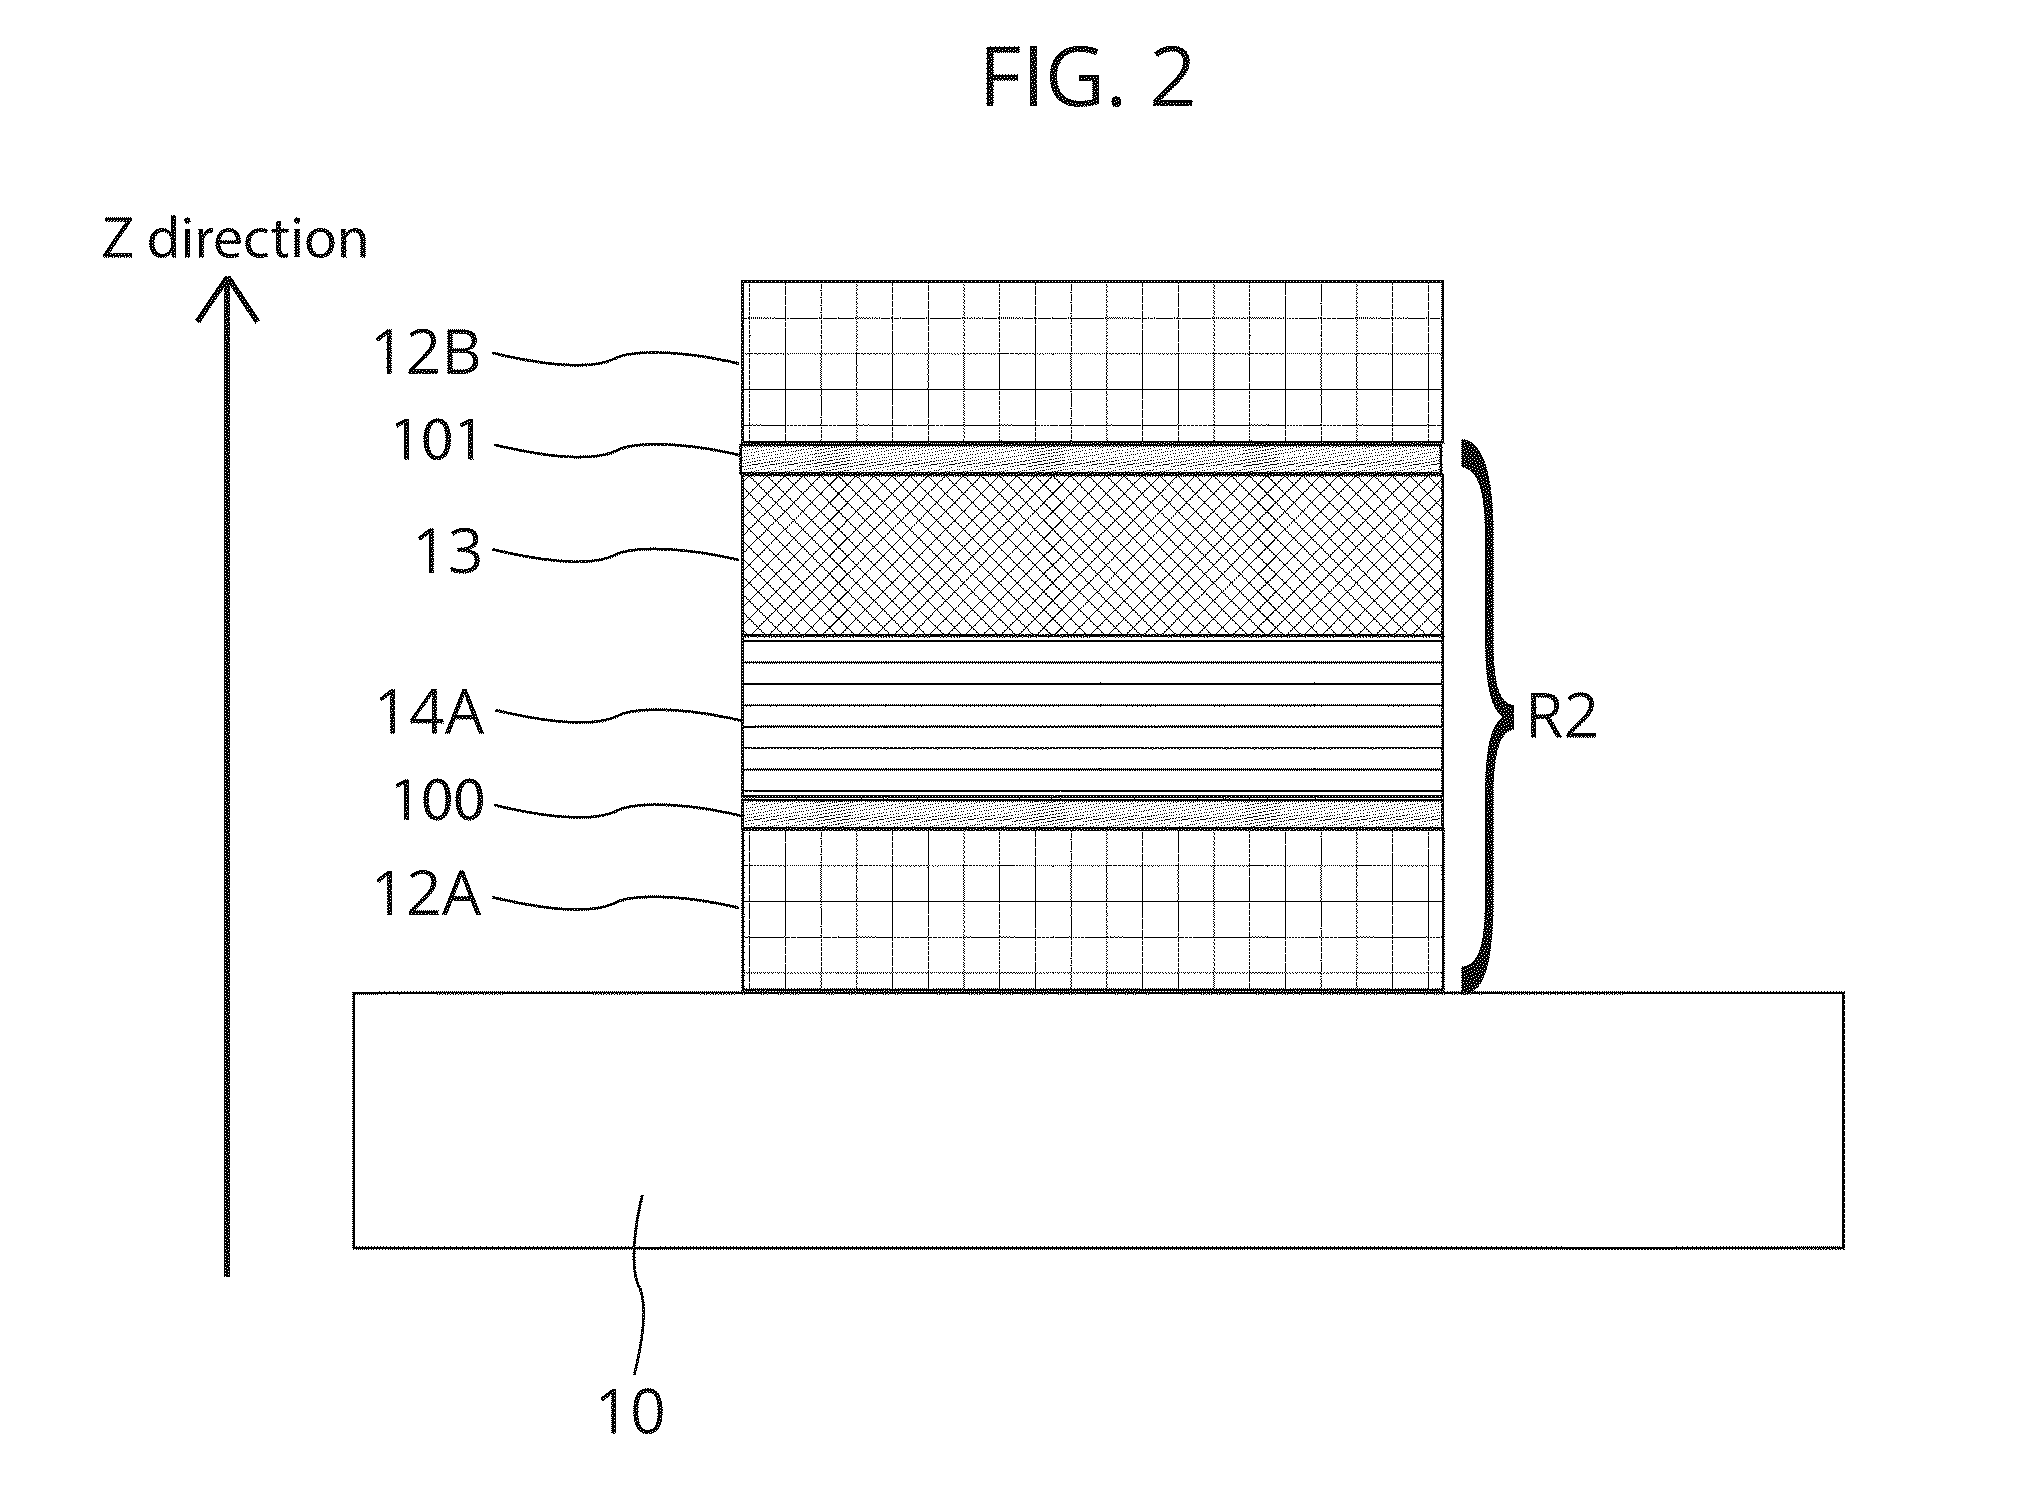 Ferroelectric memory device and fabrication process thereof, and methods for operation thereof